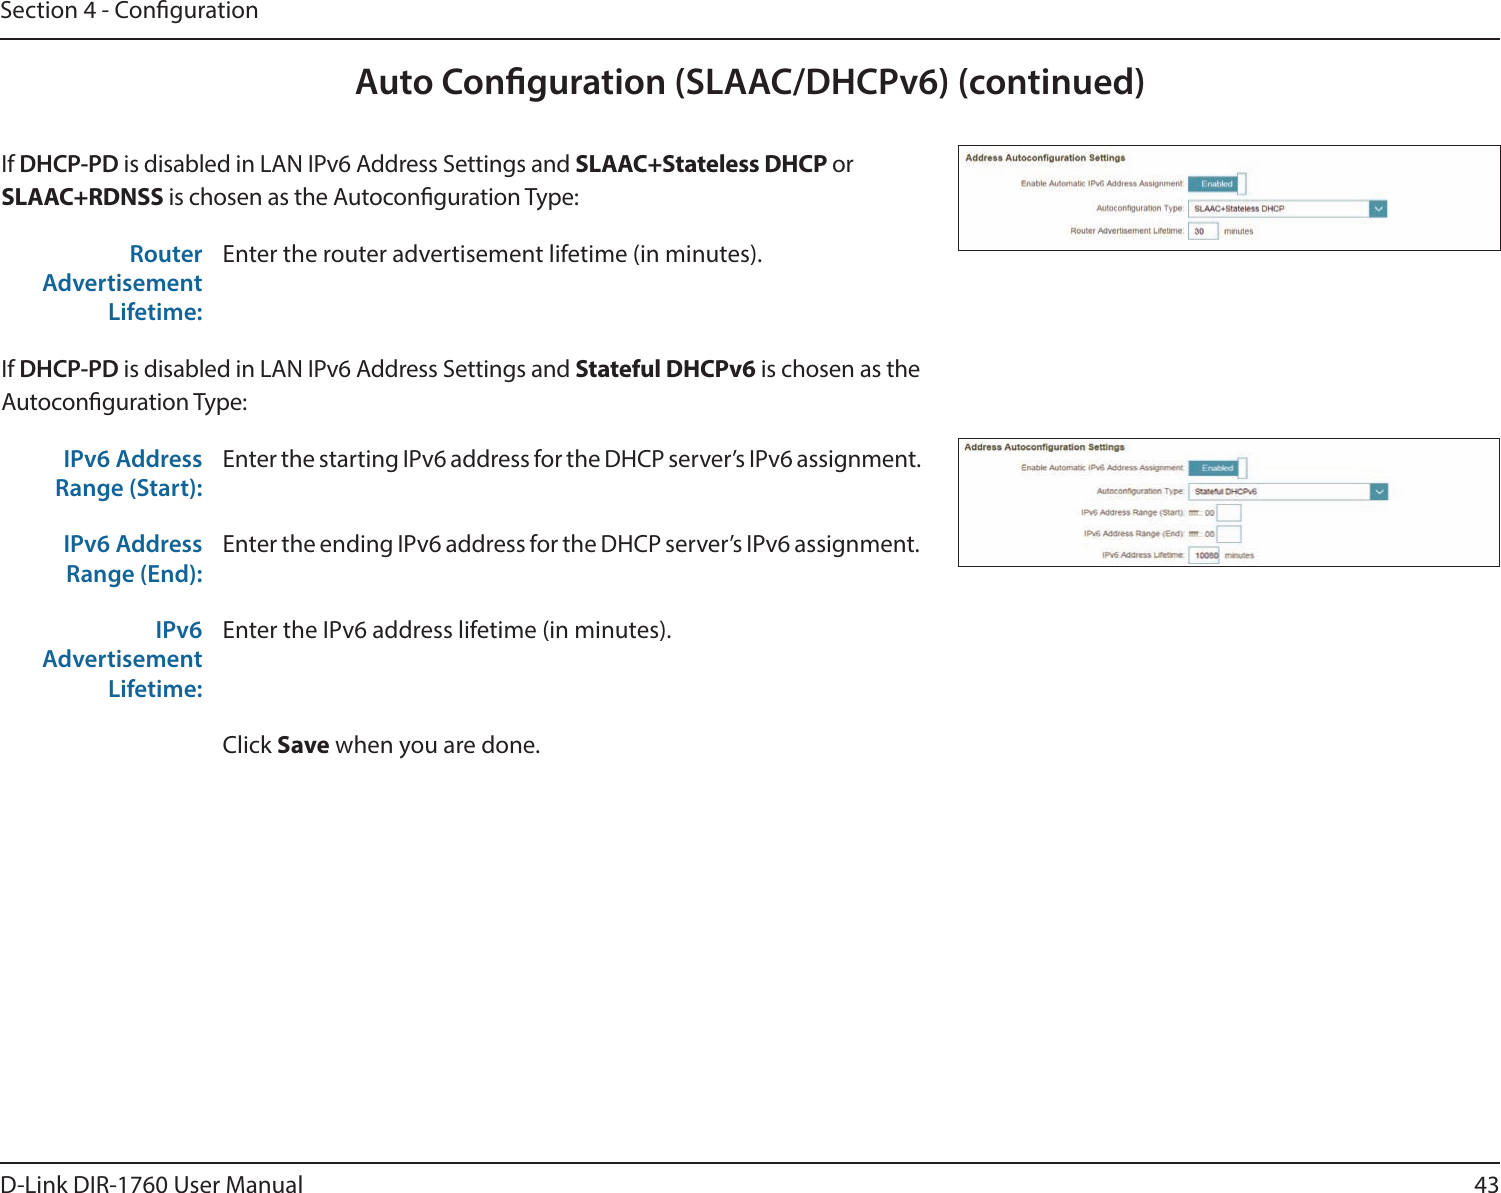 43D-Link DIR-1760 User ManualSection 4 - CongurationAuto Conguration (SLAAC/DHCPv6) (continued)If DHCP-PD is disabled in LAN IPv6 Address Settings and SLAAC+Stateless DHCP or SLAAC+RDNSS is chosen as the Autoconguration Type:Router Advertisement Lifetime:Enter the router advertisement lifetime (in minutes).If DHCP-PD is disabled in LAN IPv6 Address Settings and Stateful DHCPv6 is chosen as the Autoconguration Type:IPv6 Address Range (Start):Enter the starting IPv6 address for the DHCP server’s IPv6 assignment.IPv6 Address Range (End):Enter the ending IPv6 address for the DHCP server’s IPv6 assignment.IPv6 Advertisement Lifetime:Enter the IPv6 address lifetime (in minutes).Click Save when you are done.